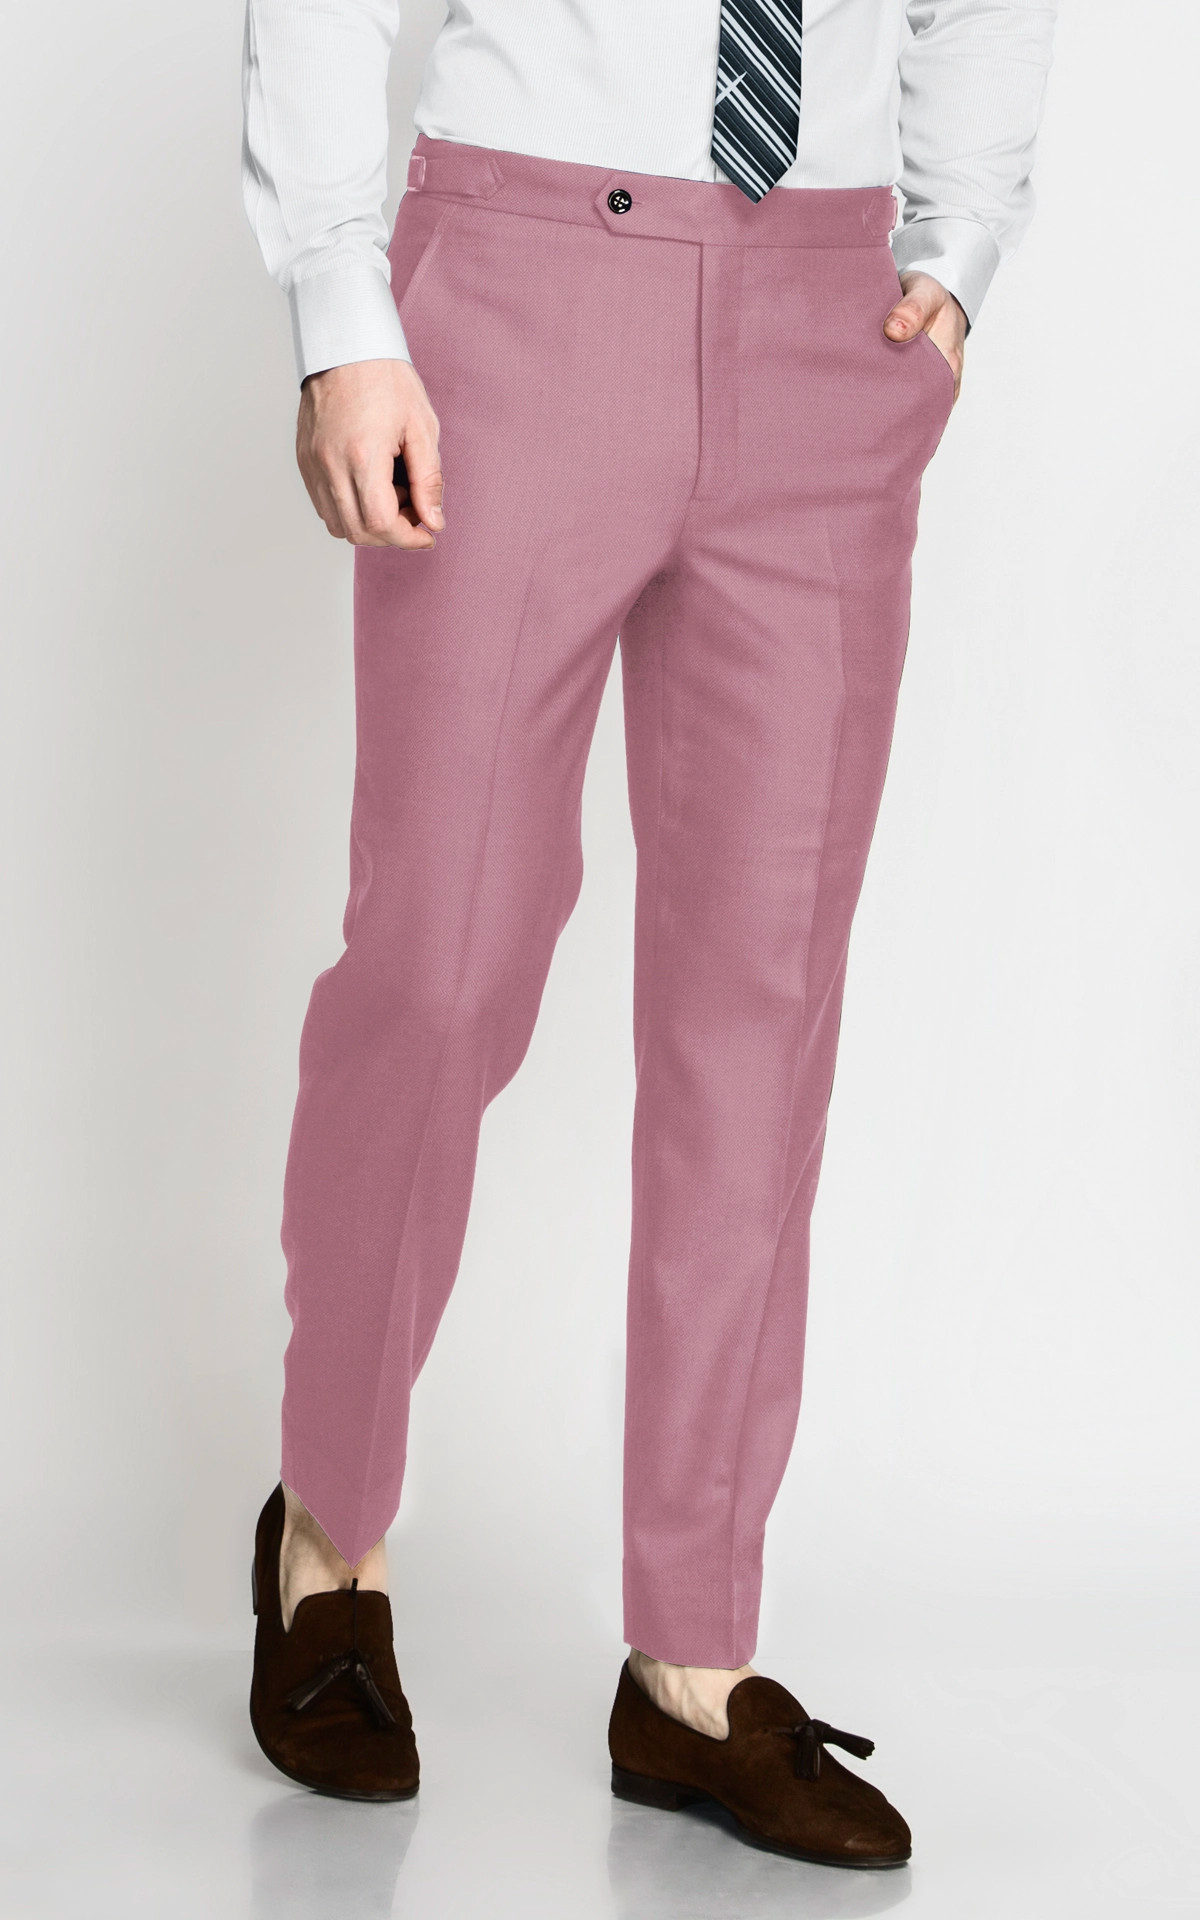 Relaxed Fit Formal Pants Style: 30-01111US - LINDBERGH